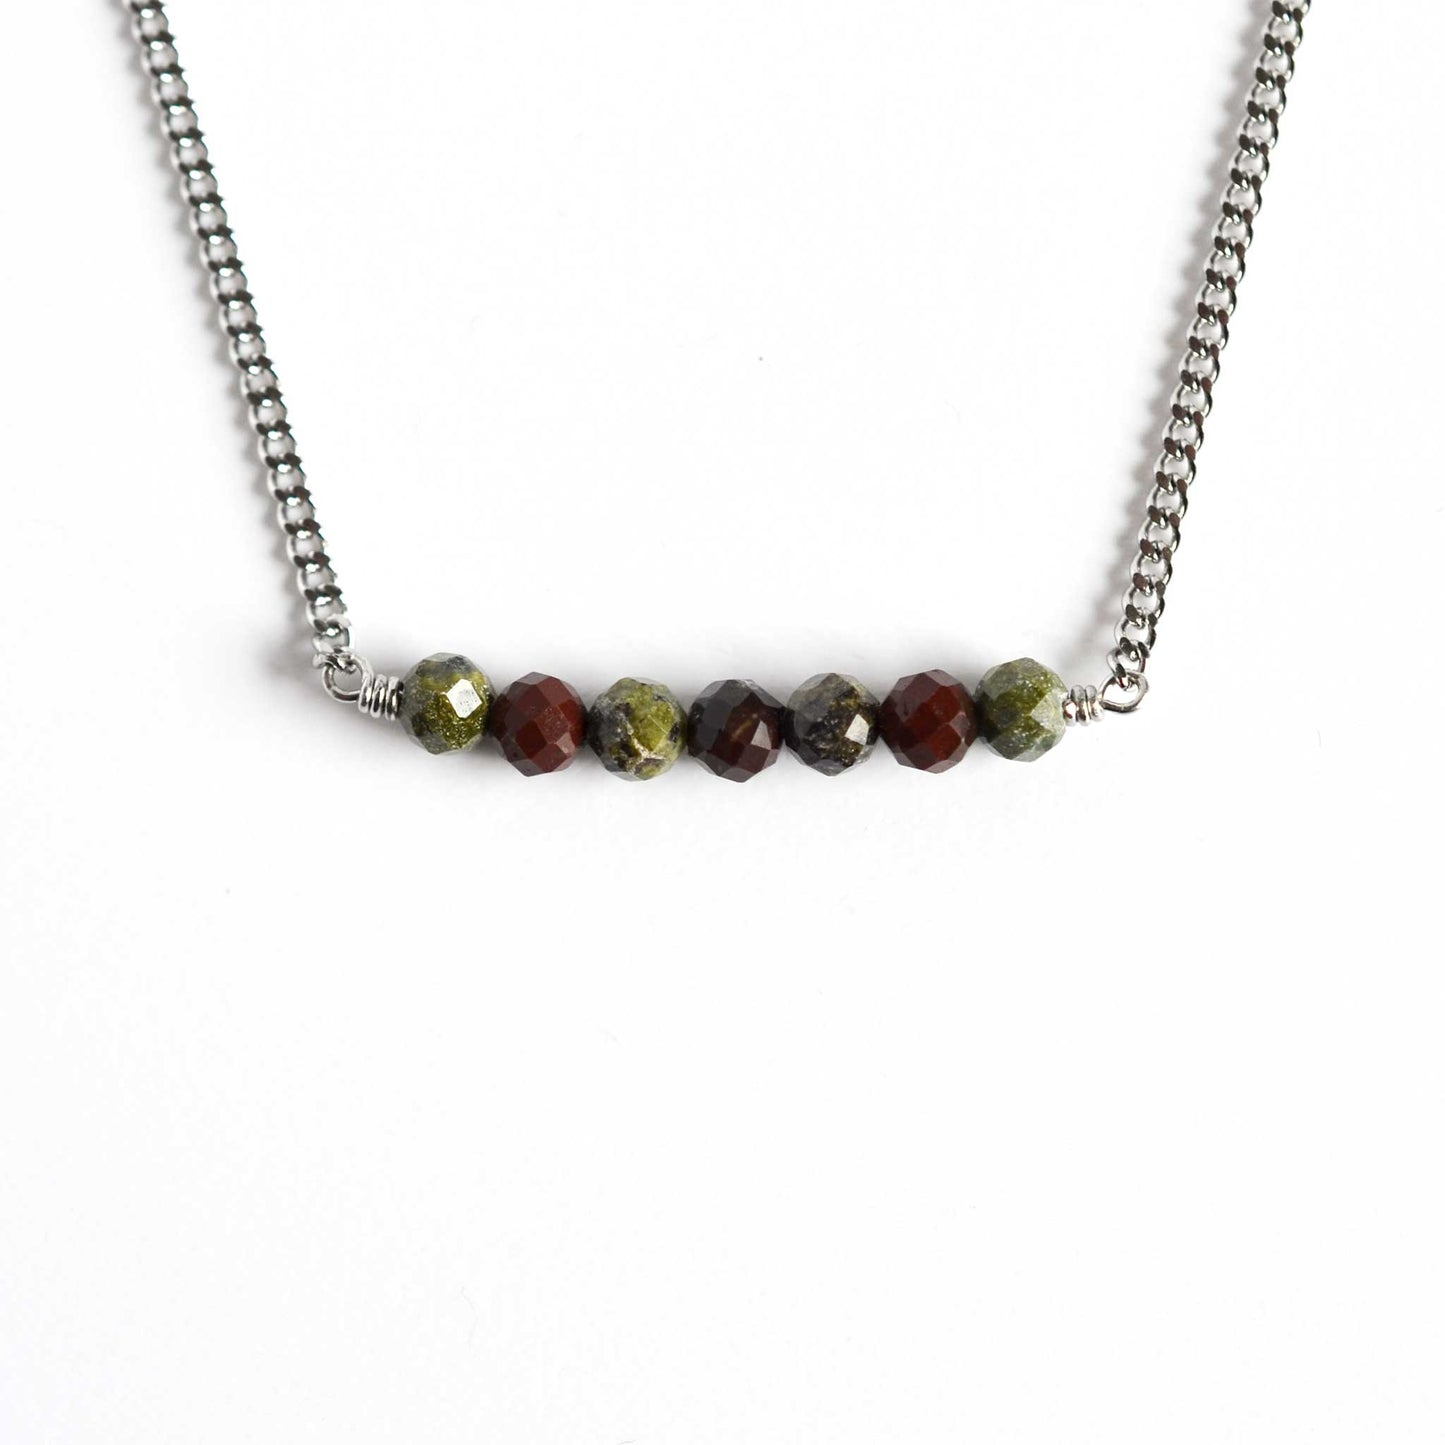 Bloodstone necklace green stone and stainless steel chain on white background